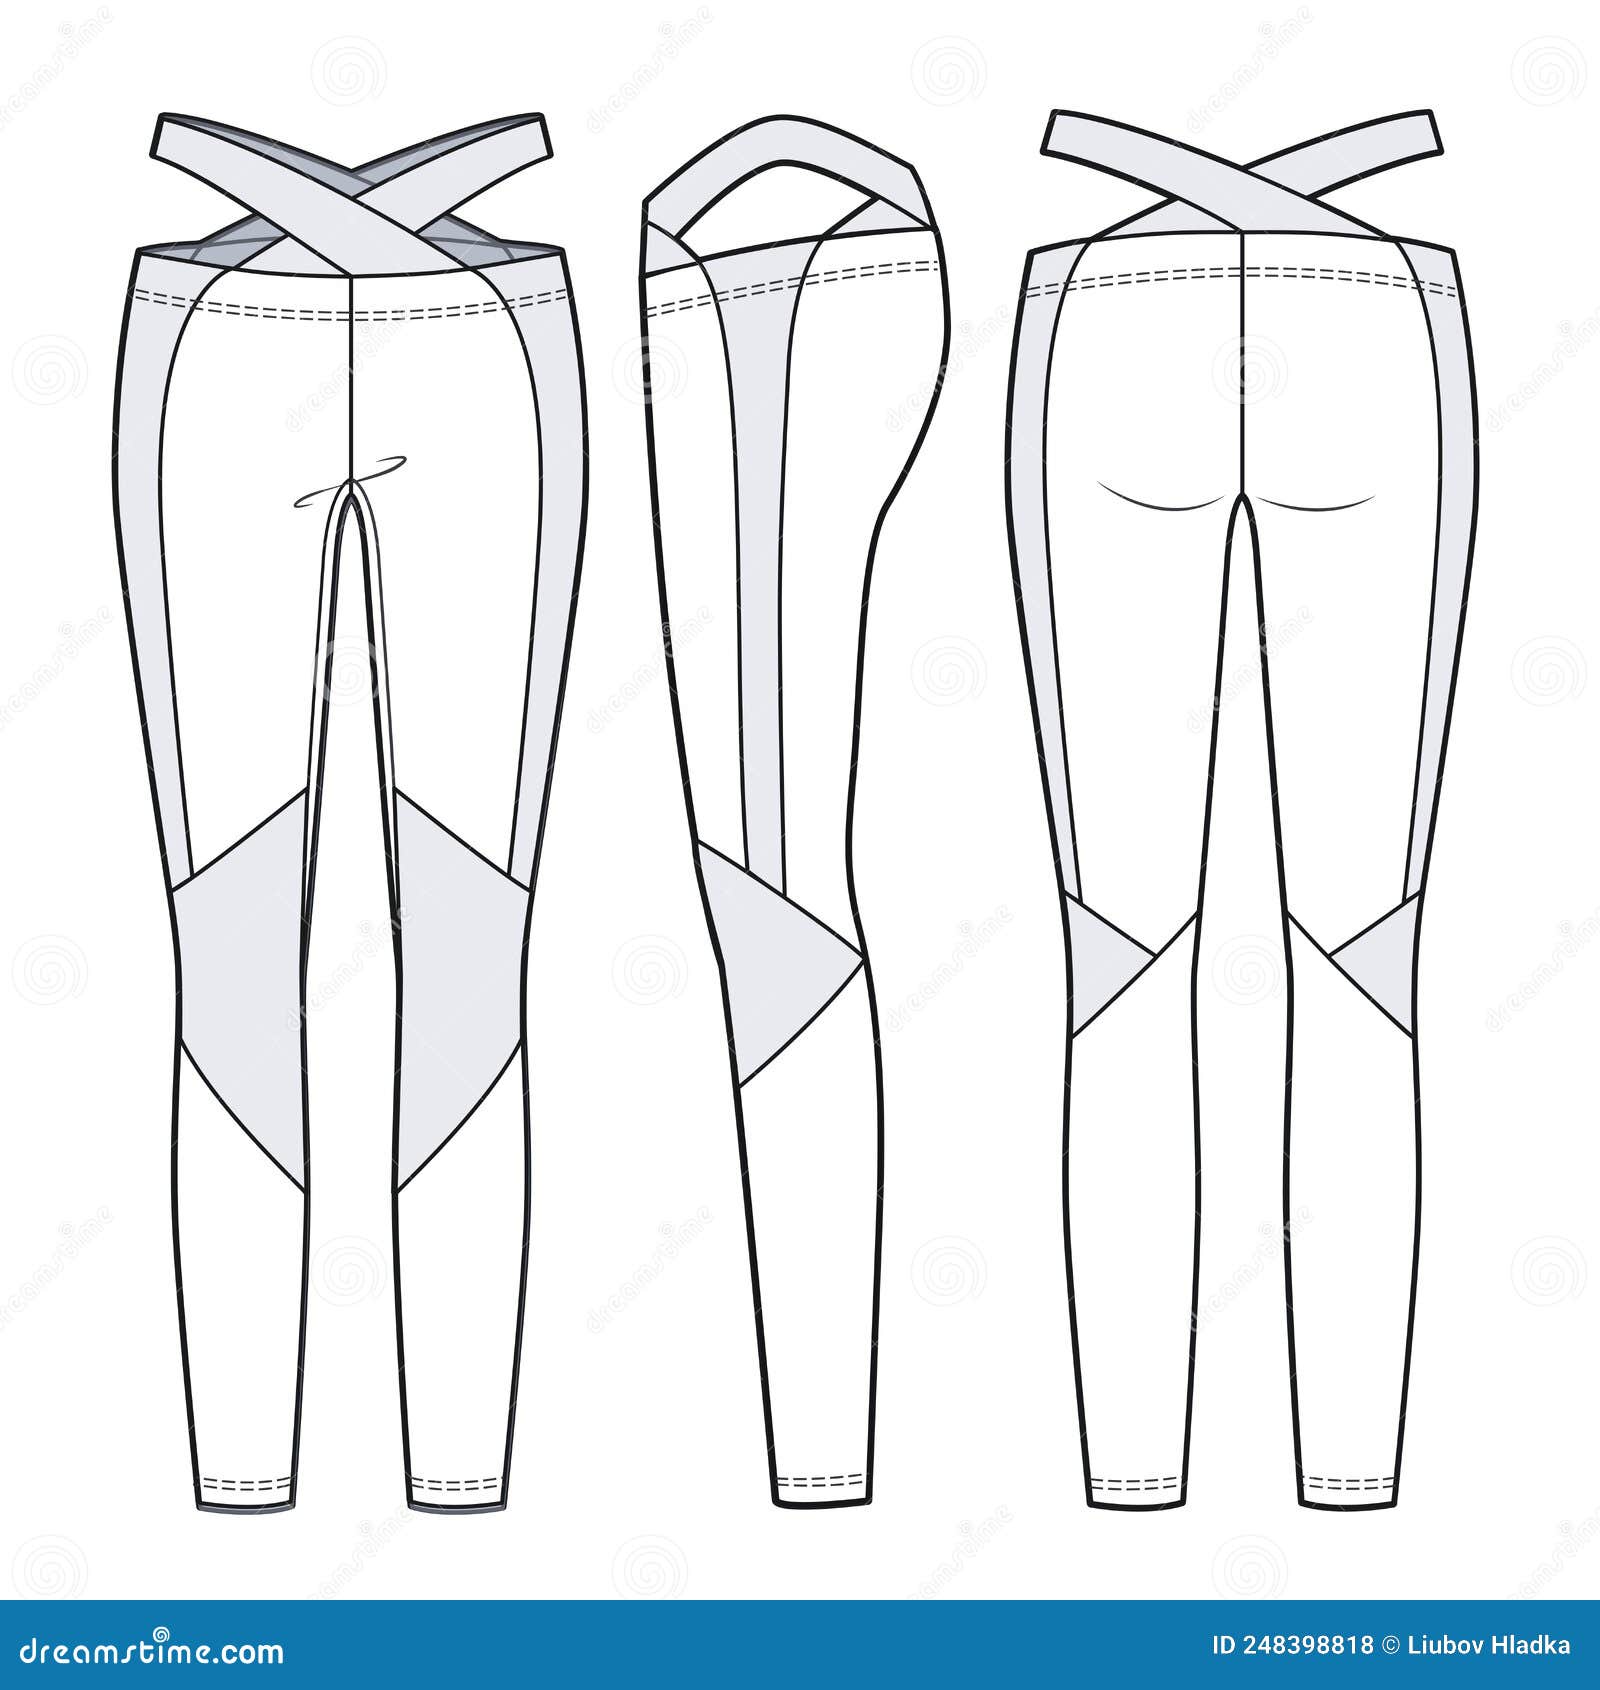 Buy Women's Pants Fashion Flat Templates / Technical Drawings / Fashion CAD  Designs for Adobe Illustrator / Fashion Flat Sketch Online in India - Etsy